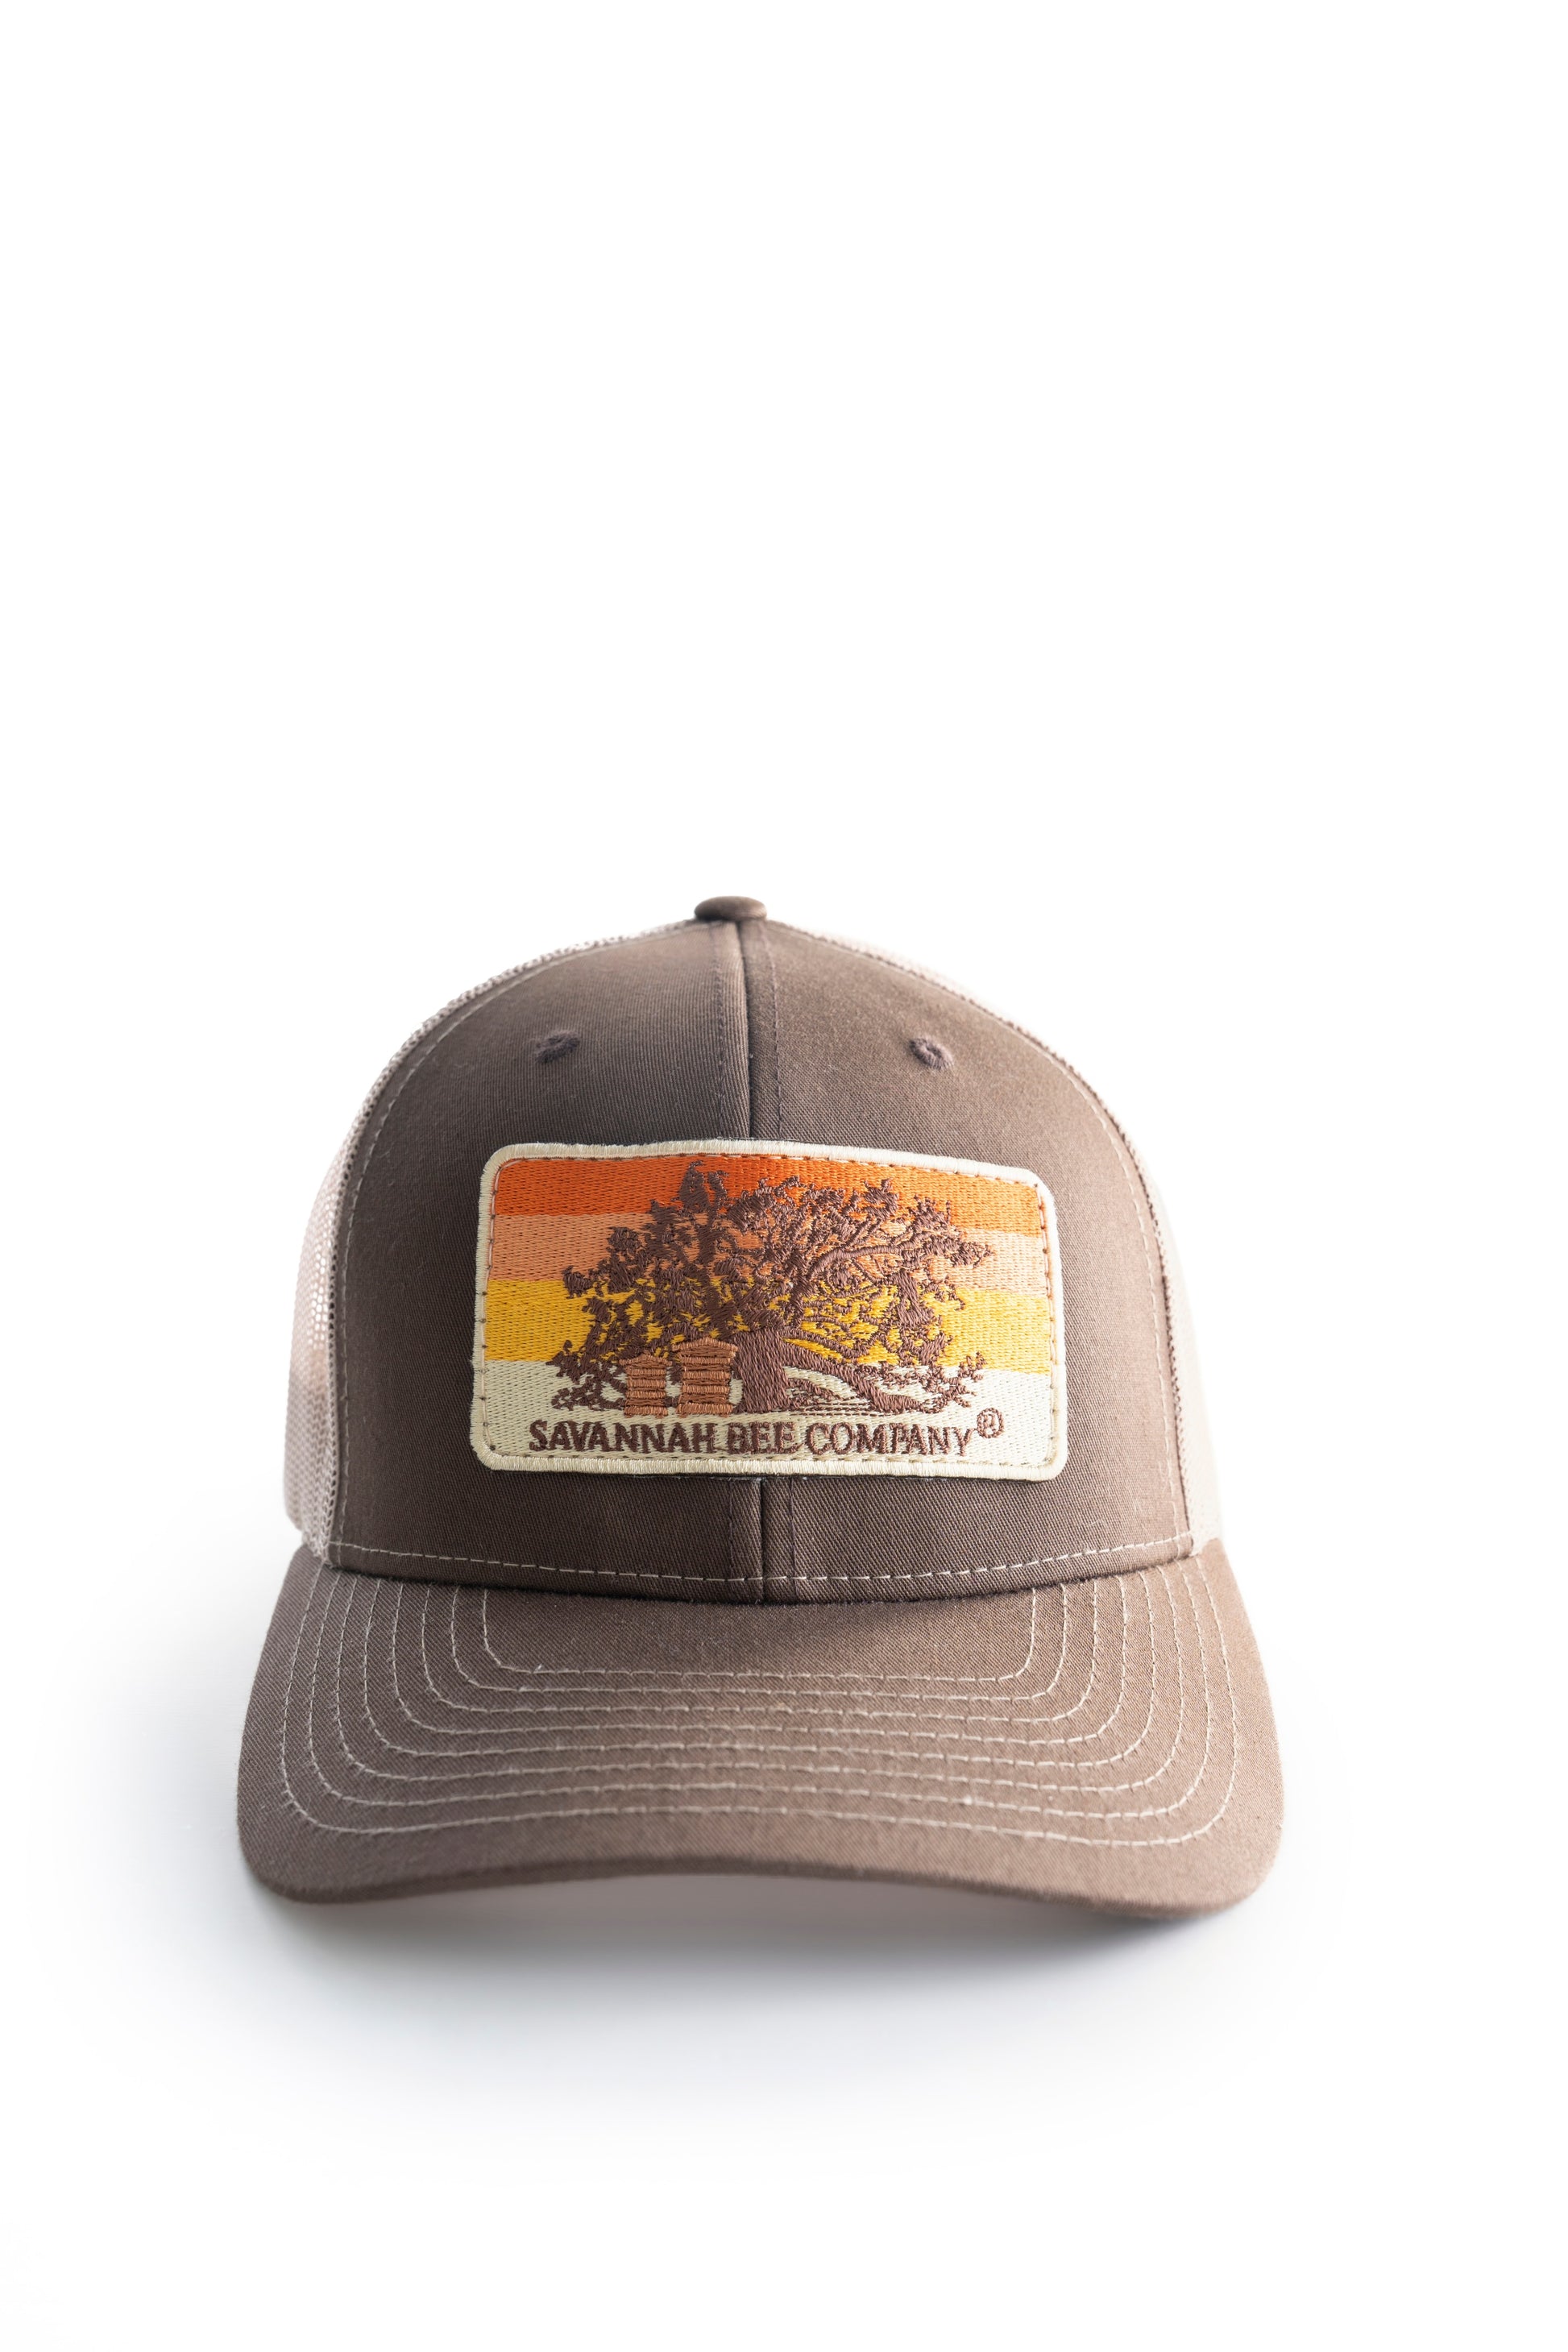 brown trucker hat with oak tree and bee boxes facing front